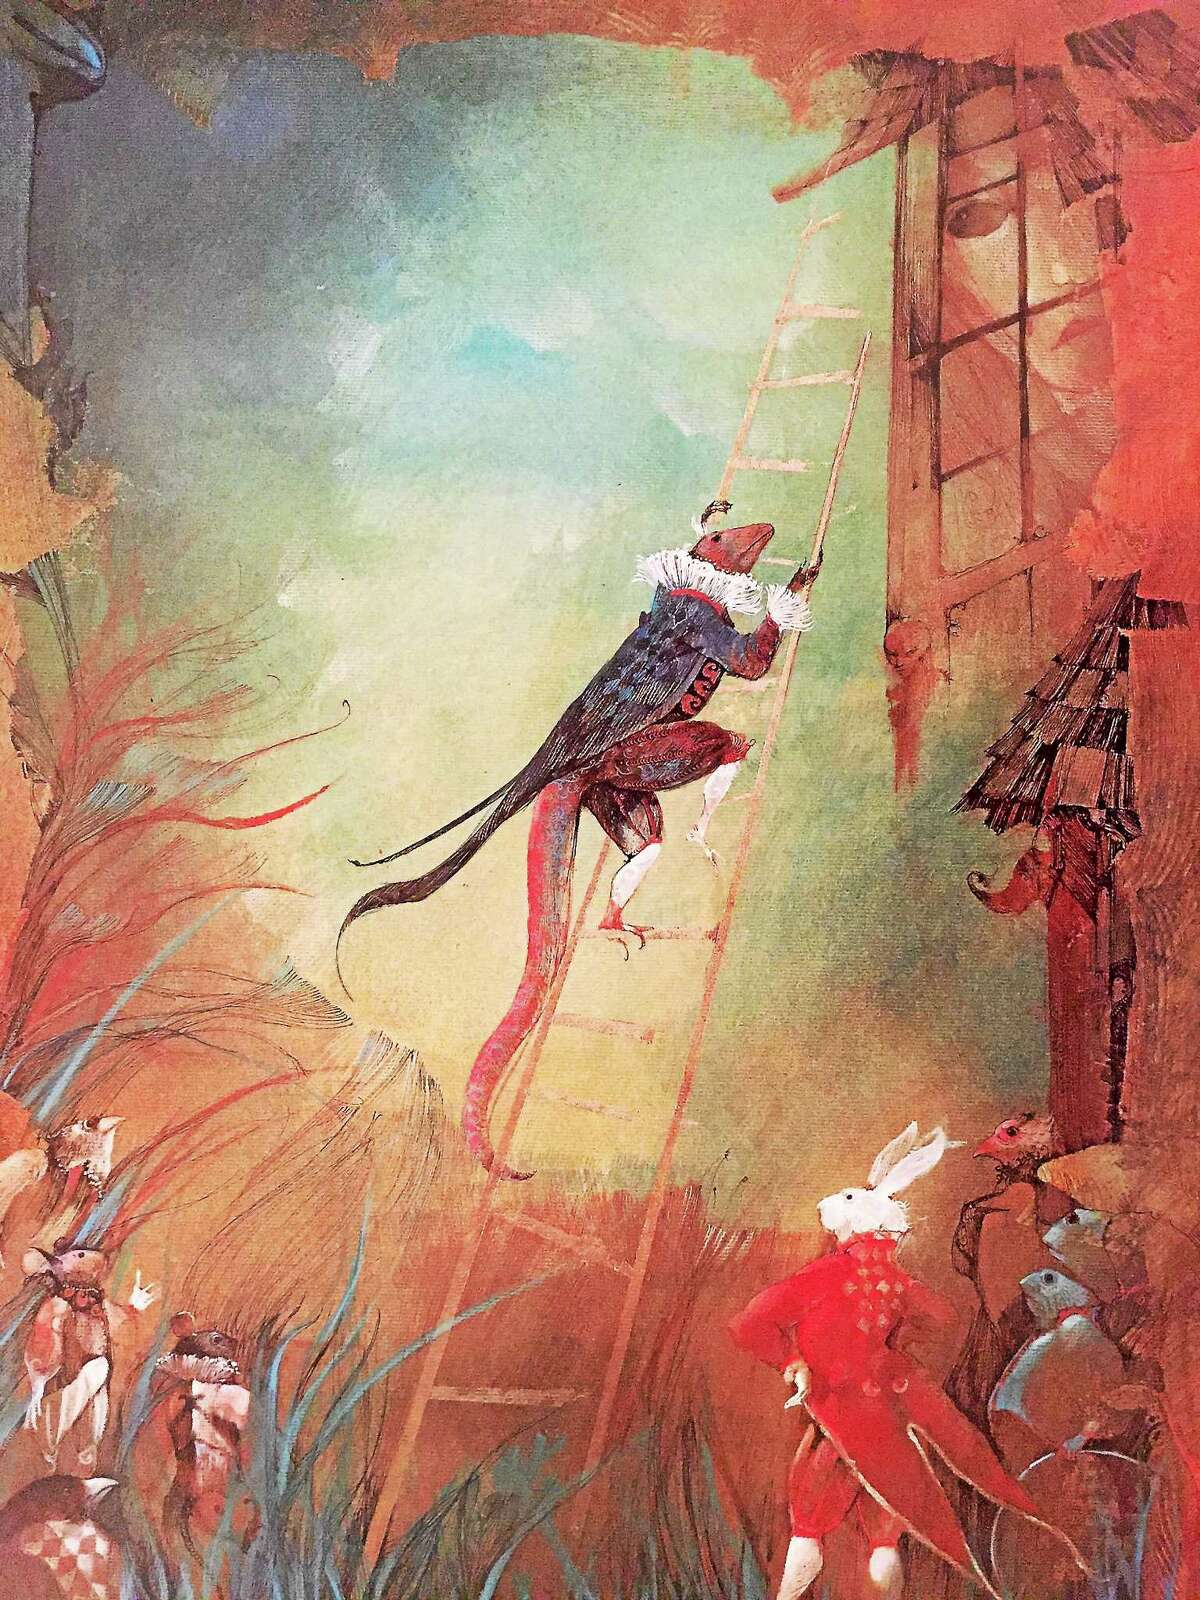 Images courtesy of Anne Bachelier